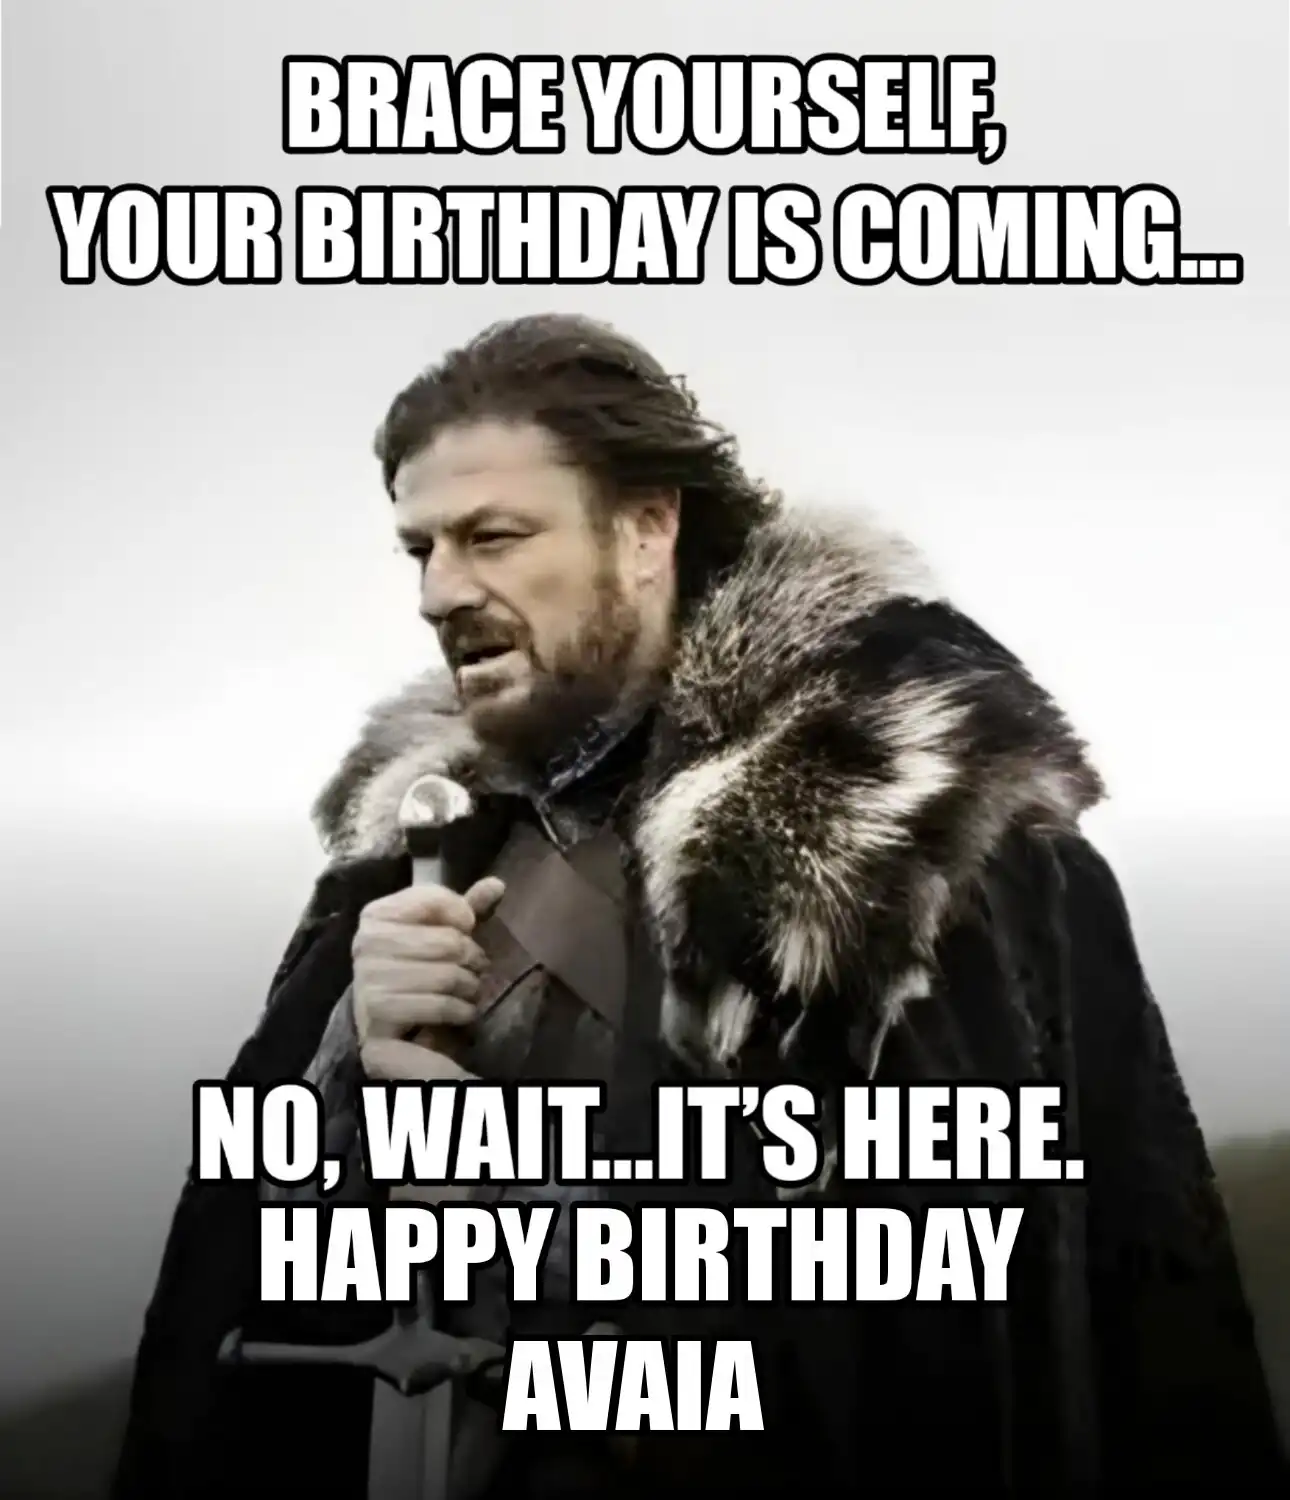 Happy Birthday Avaia Brace Yourself Your Birthday Is Coming Meme